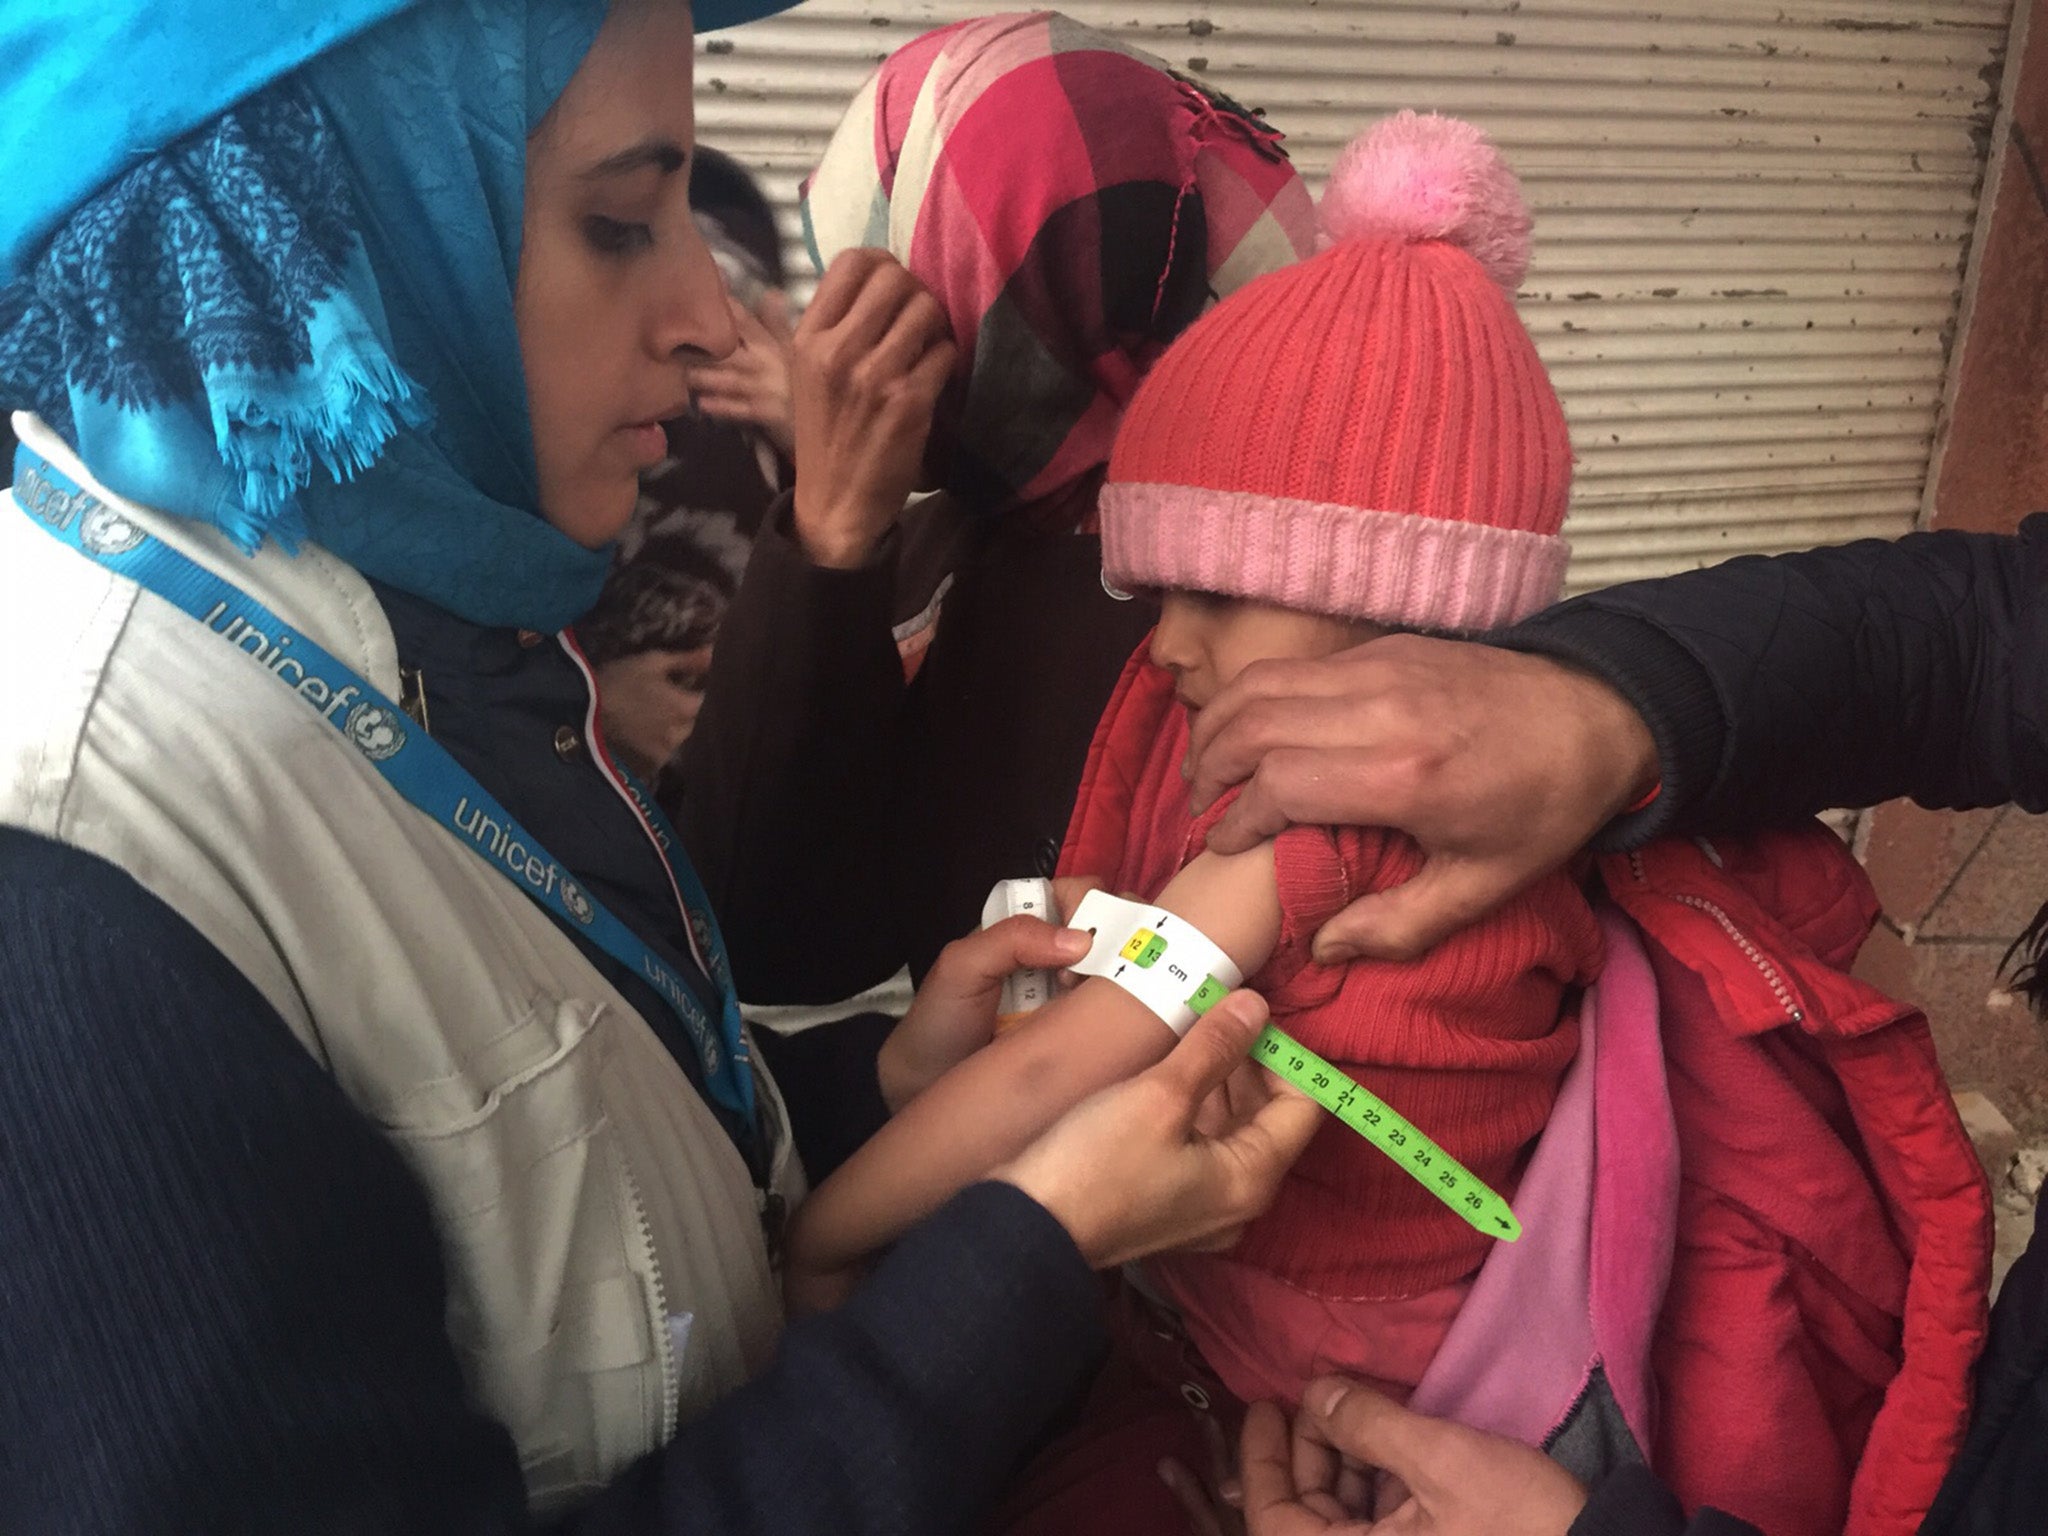 UNICEF employee measuring the arm of a malnourished child in the besieged Syrian town of Madaya, as they assess the health situation of residents of the famine-stricken town.